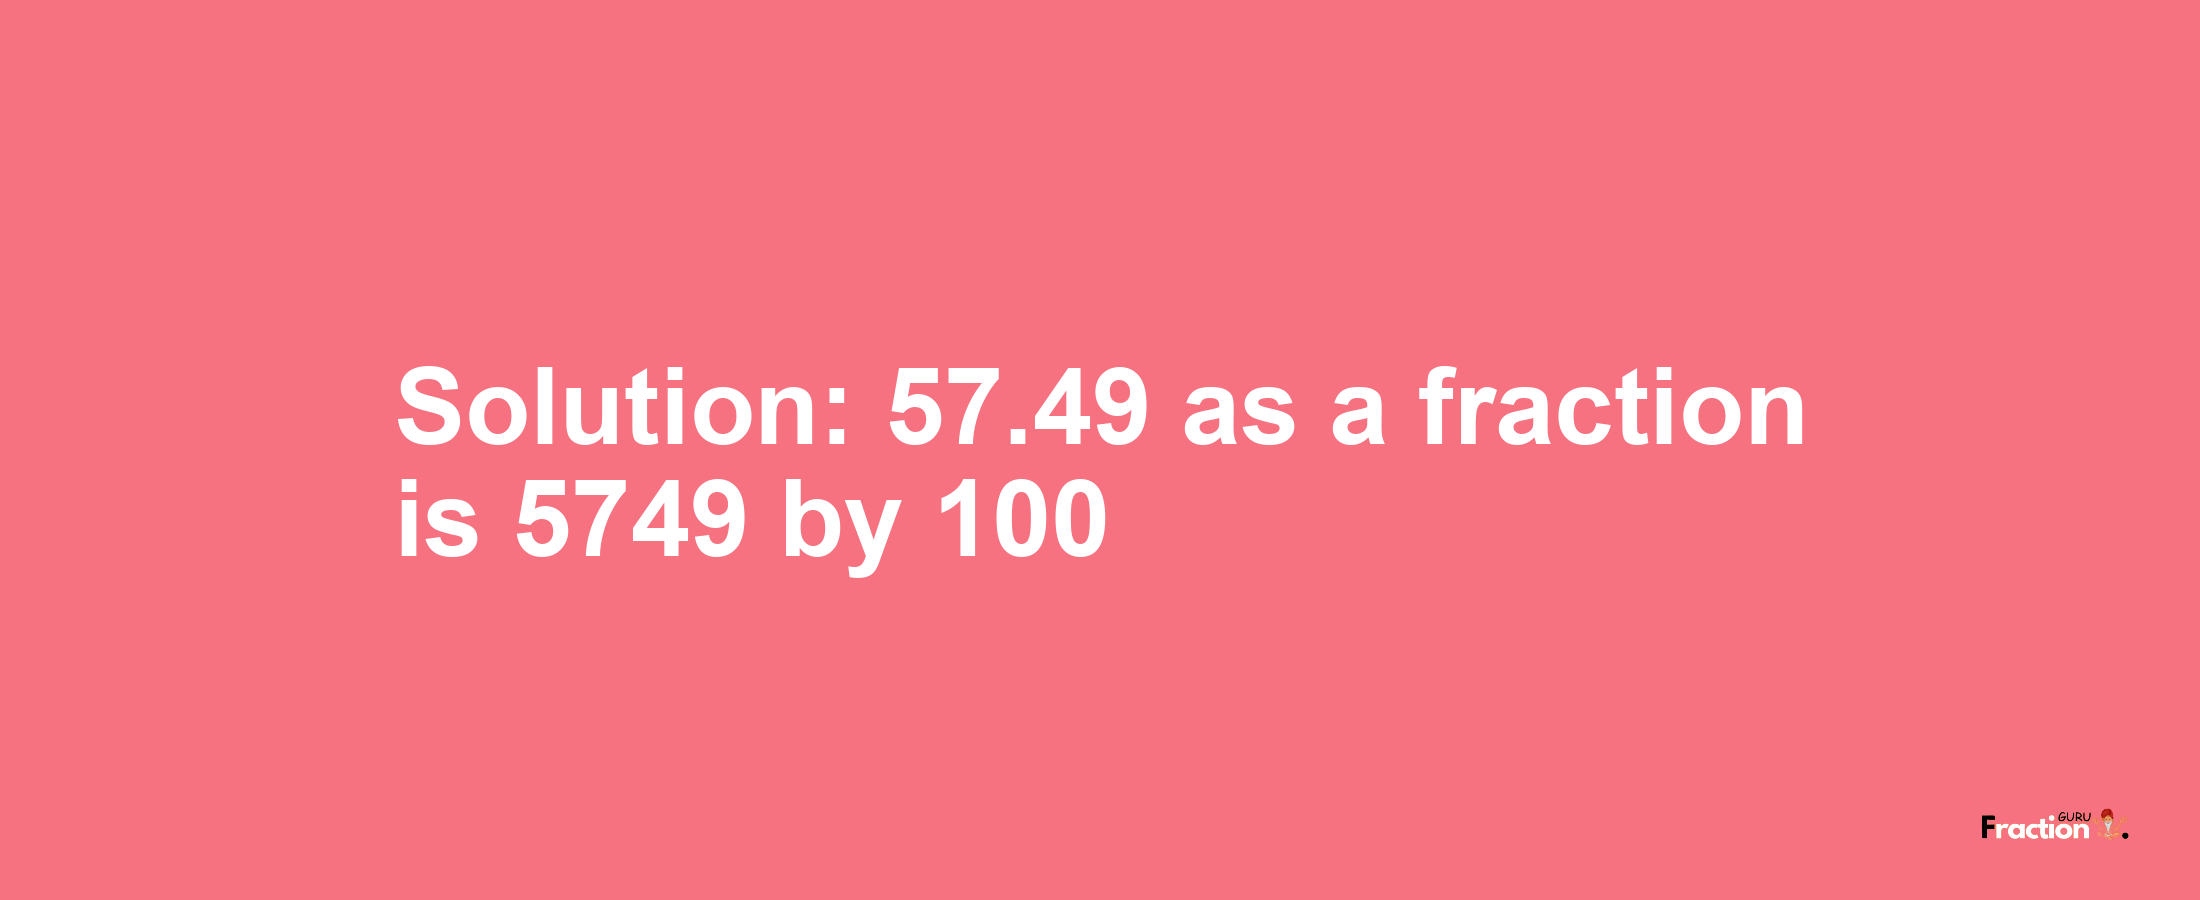 Solution:57.49 as a fraction is 5749/100